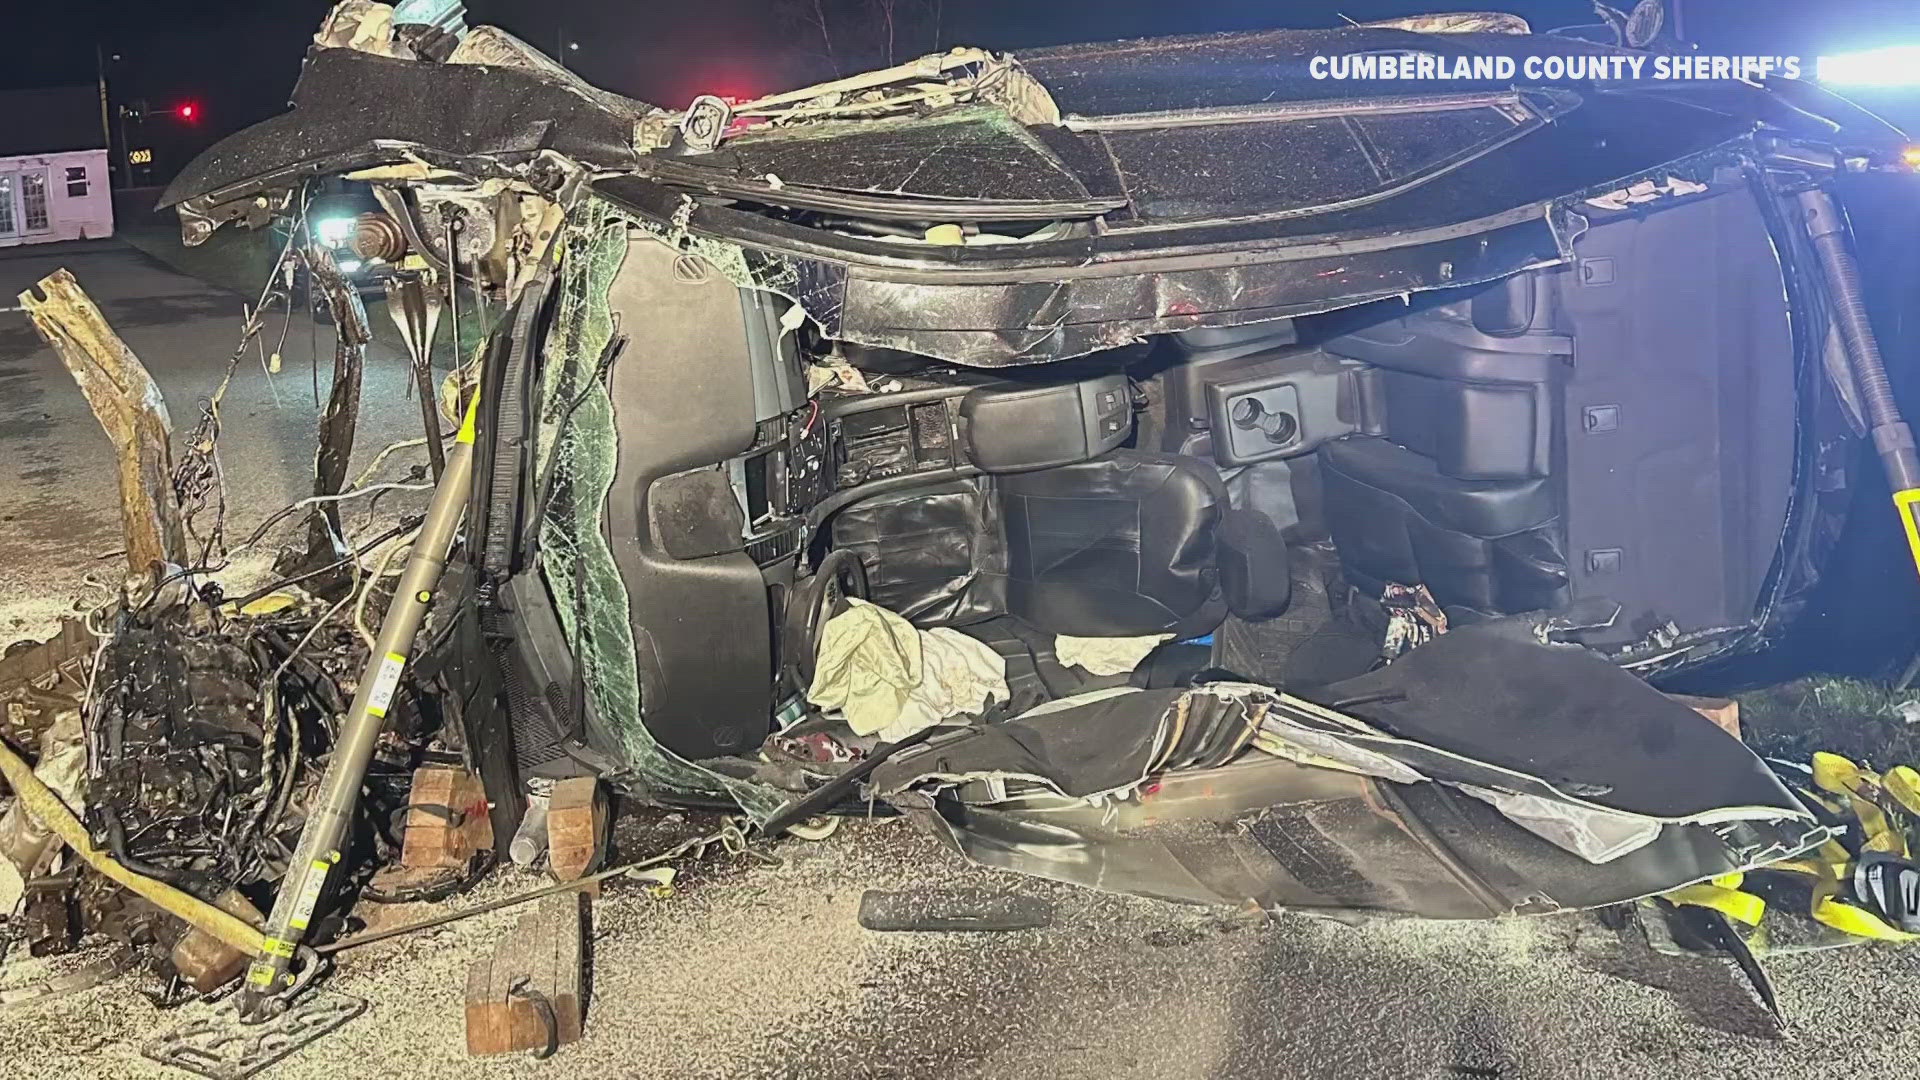 Emergency officials learned on their way to the crash that a person was believed to be trapped inside the vehicle that had since caught fire.